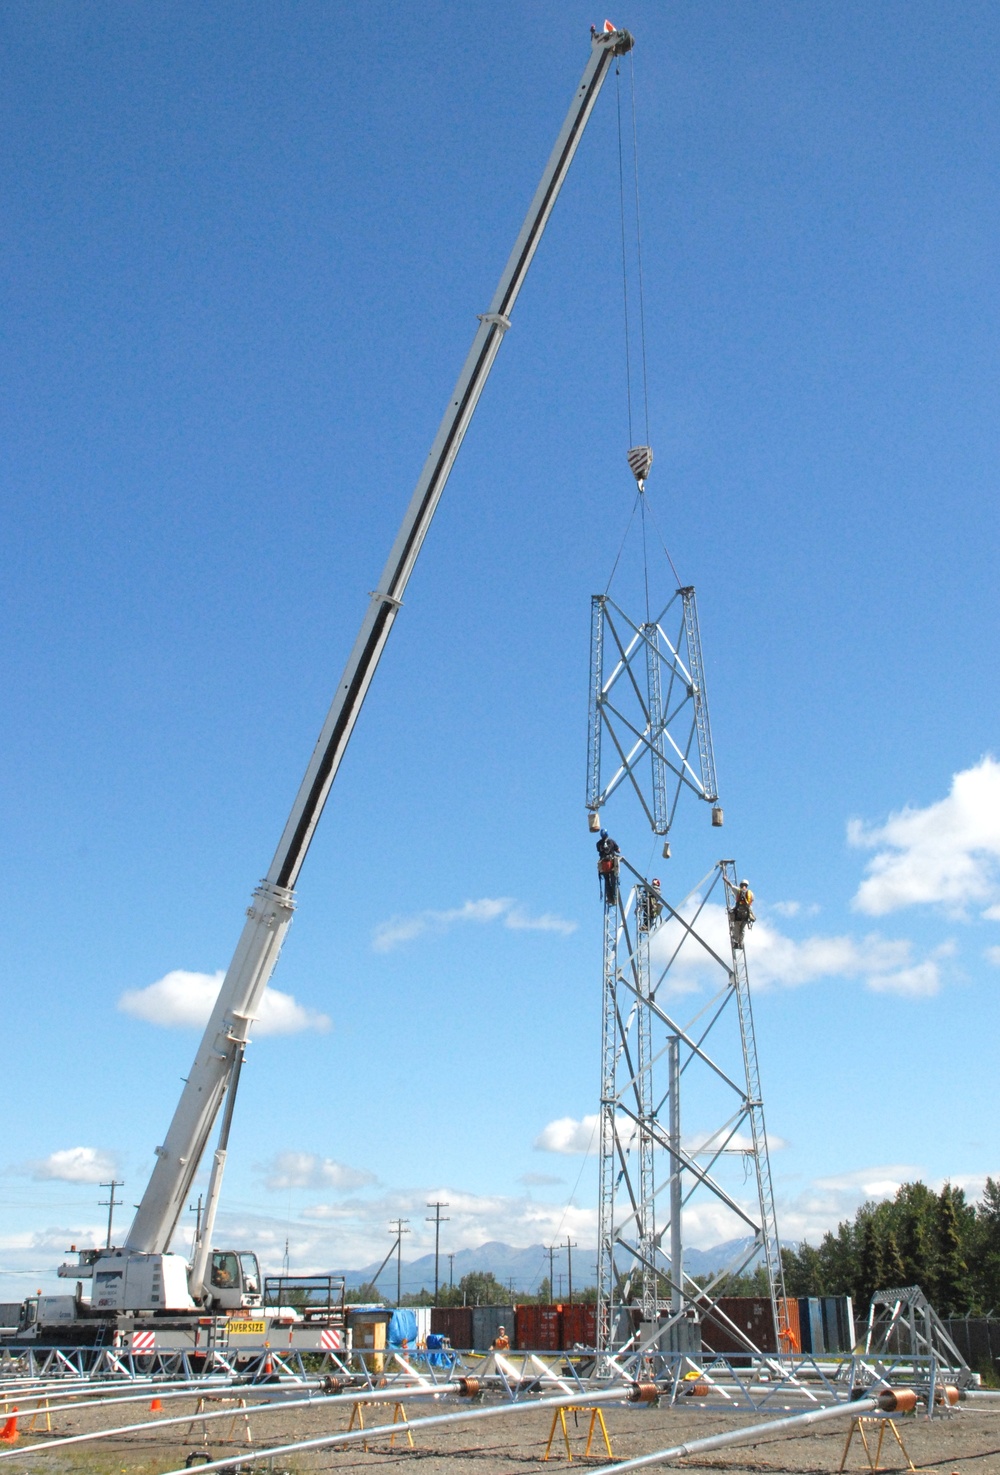 Constructing a new high-frequency radio tower